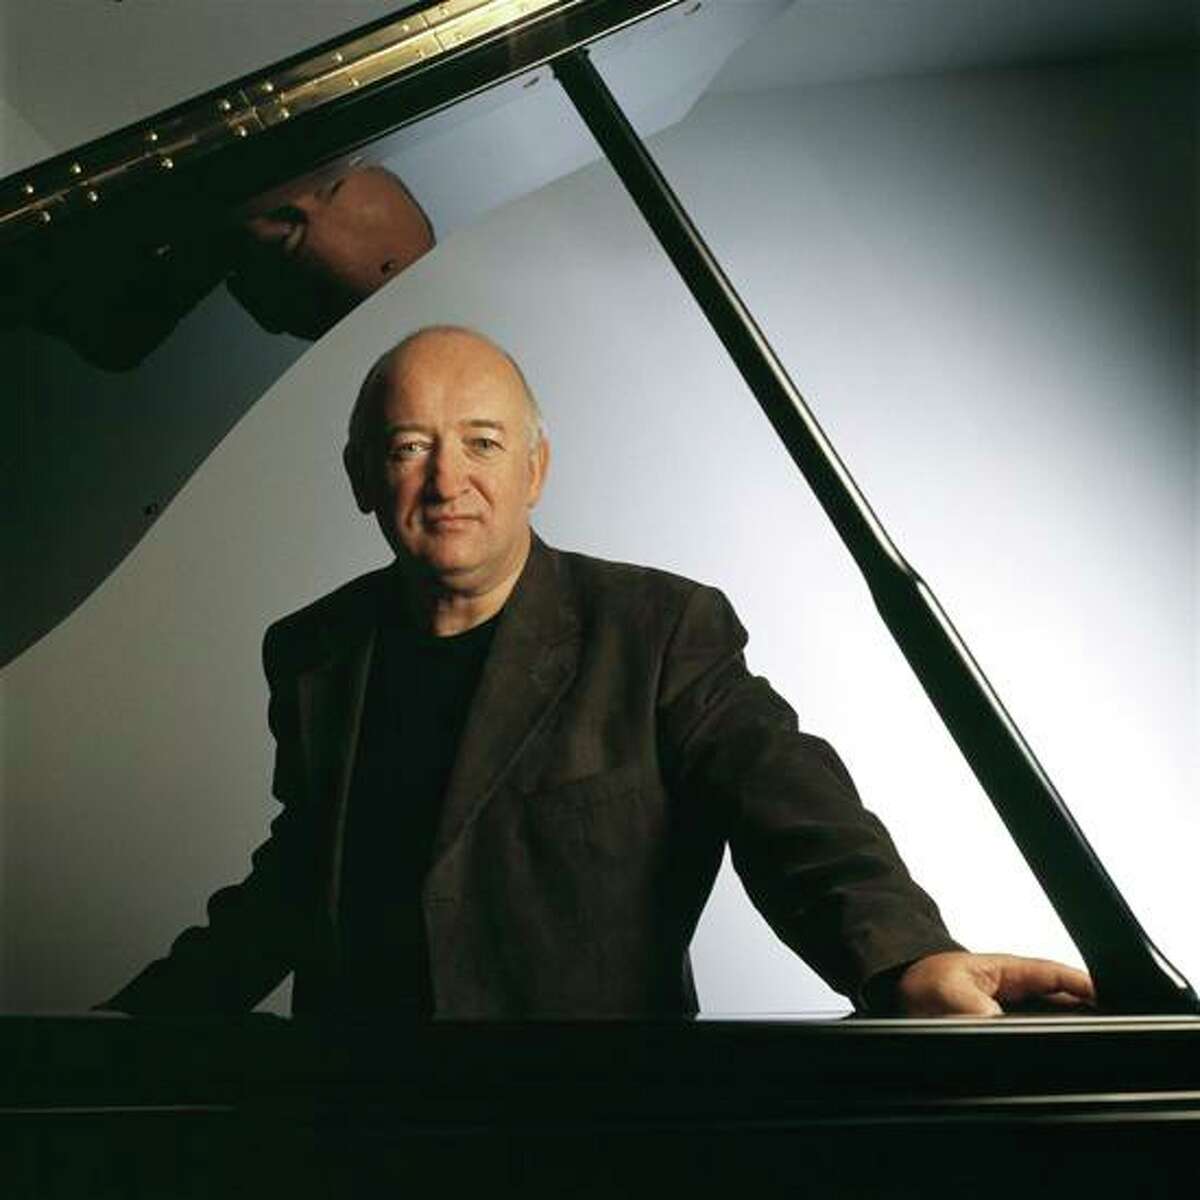 Irish pianist John O’Conor will perform with the Greenwich Symphony Orchestra Feb. 22 and Feb. 23.